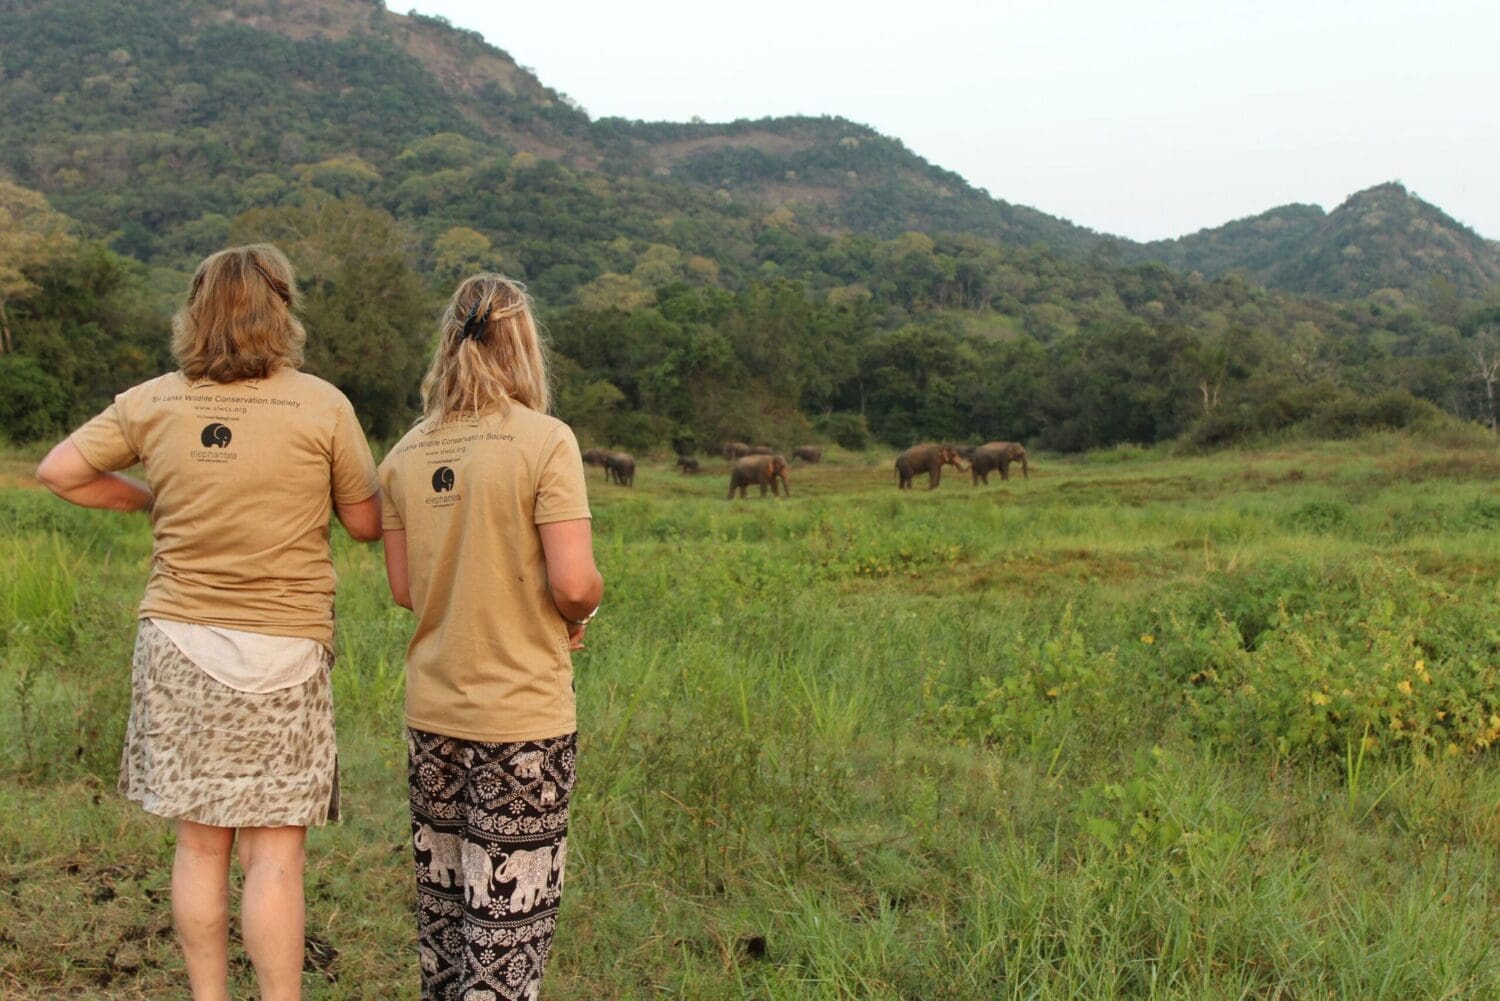 Volunteers monitoring on the Elephant Conservation project